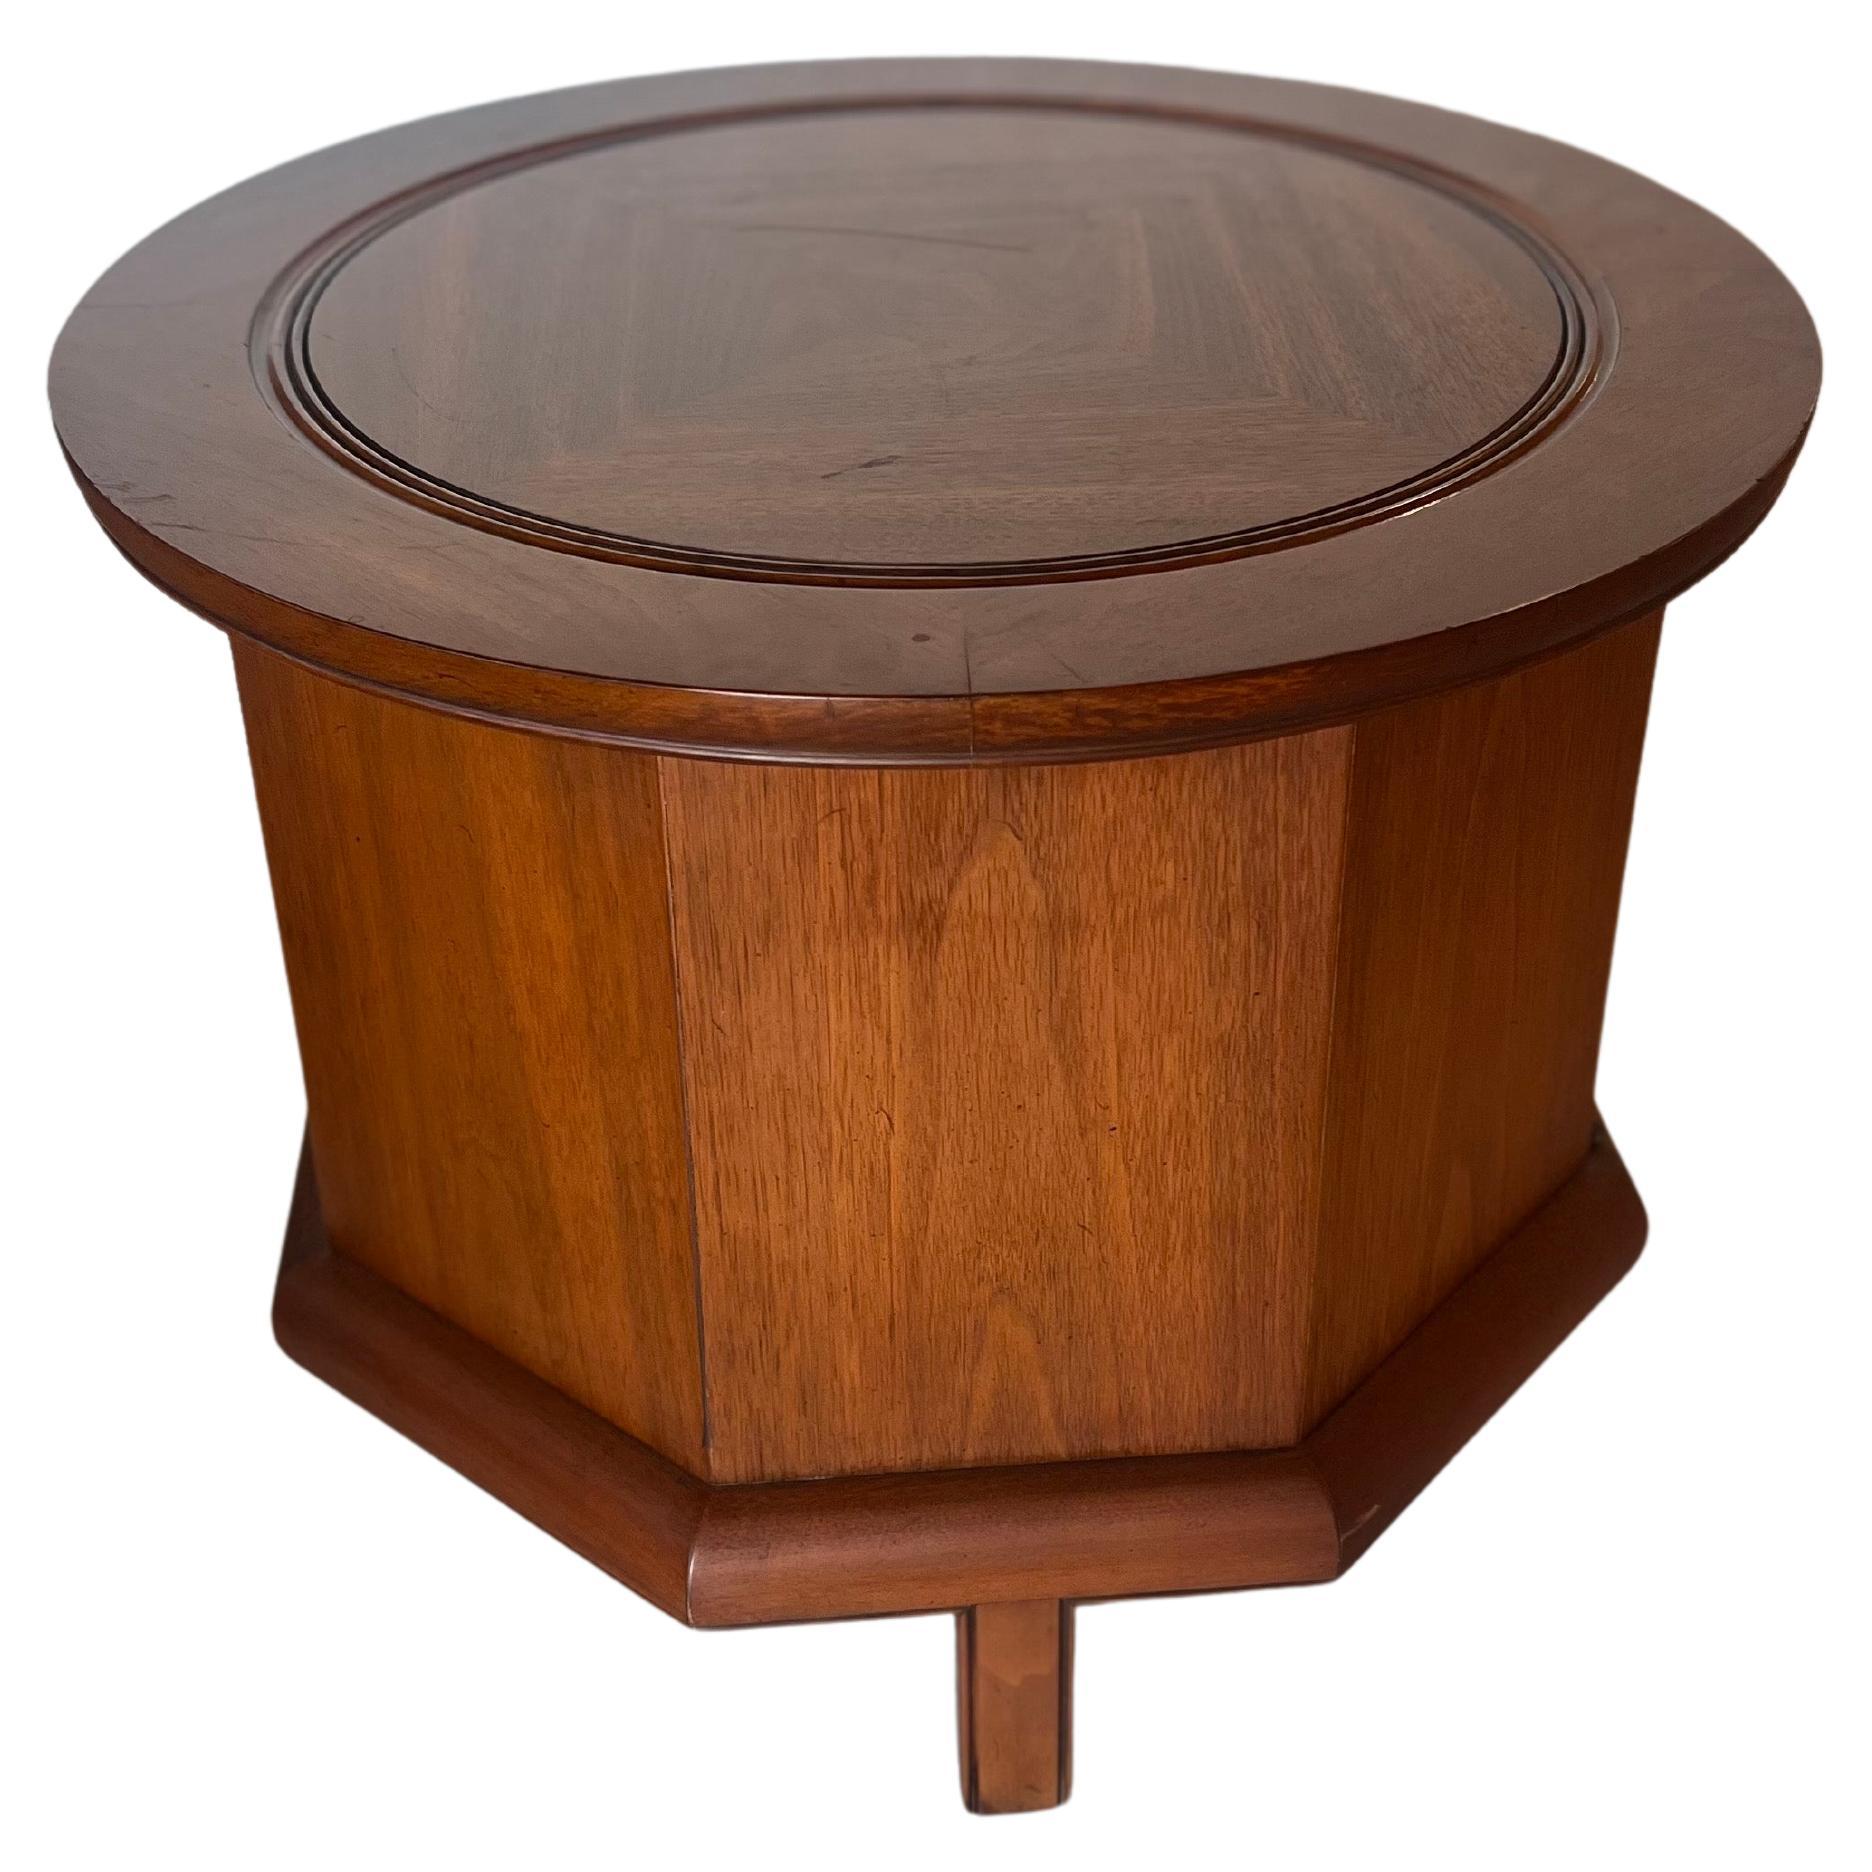 American Mid century Modern Walnut End Cocktail Table In Excellent Condition For Sale In San Diego, CA